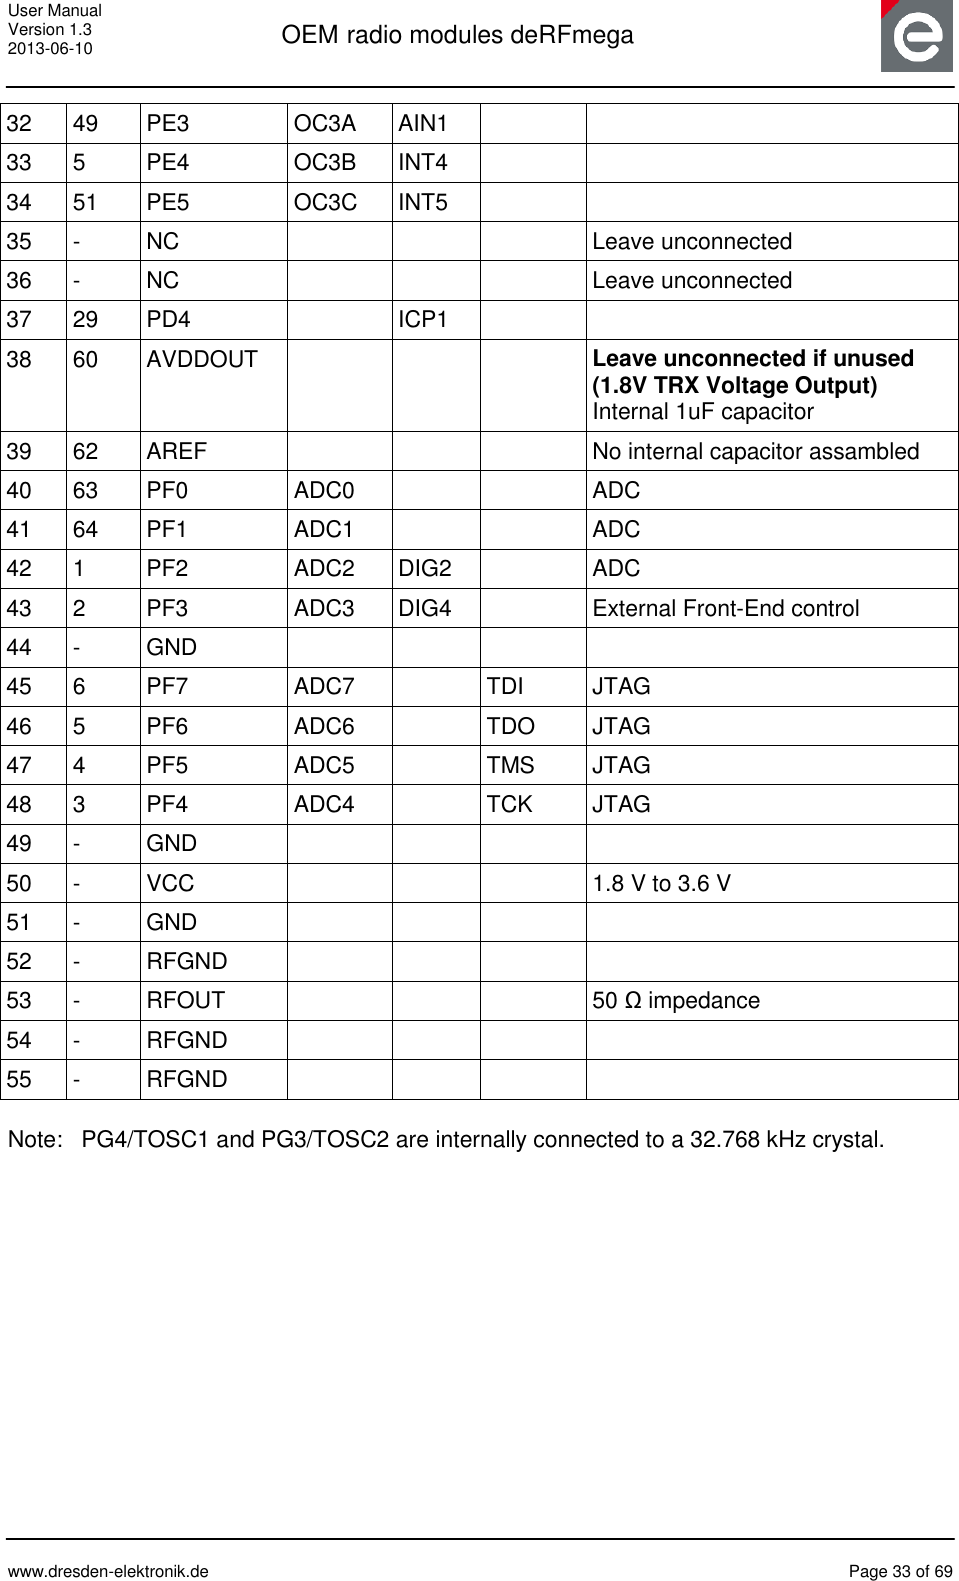 User Manual Version 1.3 2013-06-10  OEM radio modules deRFmega      www.dresden-elektronik.de  Page 33 of 69  32 49 PE3 OC3A AIN1   33 5 PE4 OC3B INT4   34 51 PE5 OC3C INT5   35 - NC    Leave unconnected 36 - NC    Leave unconnected 37 29 PD4  ICP1   38 60 AVDDOUT    Leave unconnected if unused (1.8V TRX Voltage Output) Internal 1uF capacitor 39 62 AREF    No internal capacitor assambled 40 63 PF0 ADC0   ADC 41 64 PF1 ADC1   ADC 42 1 PF2 ADC2 DIG2  ADC 43 2 PF3 ADC3 DIG4  External Front-End control 44 - GND     45 6 PF7 ADC7  TDI JTAG 46 5 PF6 ADC6  TDO JTAG 47 4 PF5 ADC5  TMS JTAG 48 3 PF4 ADC4  TCK JTAG 49 - GND     50 - VCC    1.8 V to 3.6 V 51 - GND     52 - RFGND     53 - RFOUT    50 Ω impedance 54 - RFGND     55 - RFGND      Note:   PG4/TOSC1 and PG3/TOSC2 are internally connected to a 32.768 kHz crystal.  